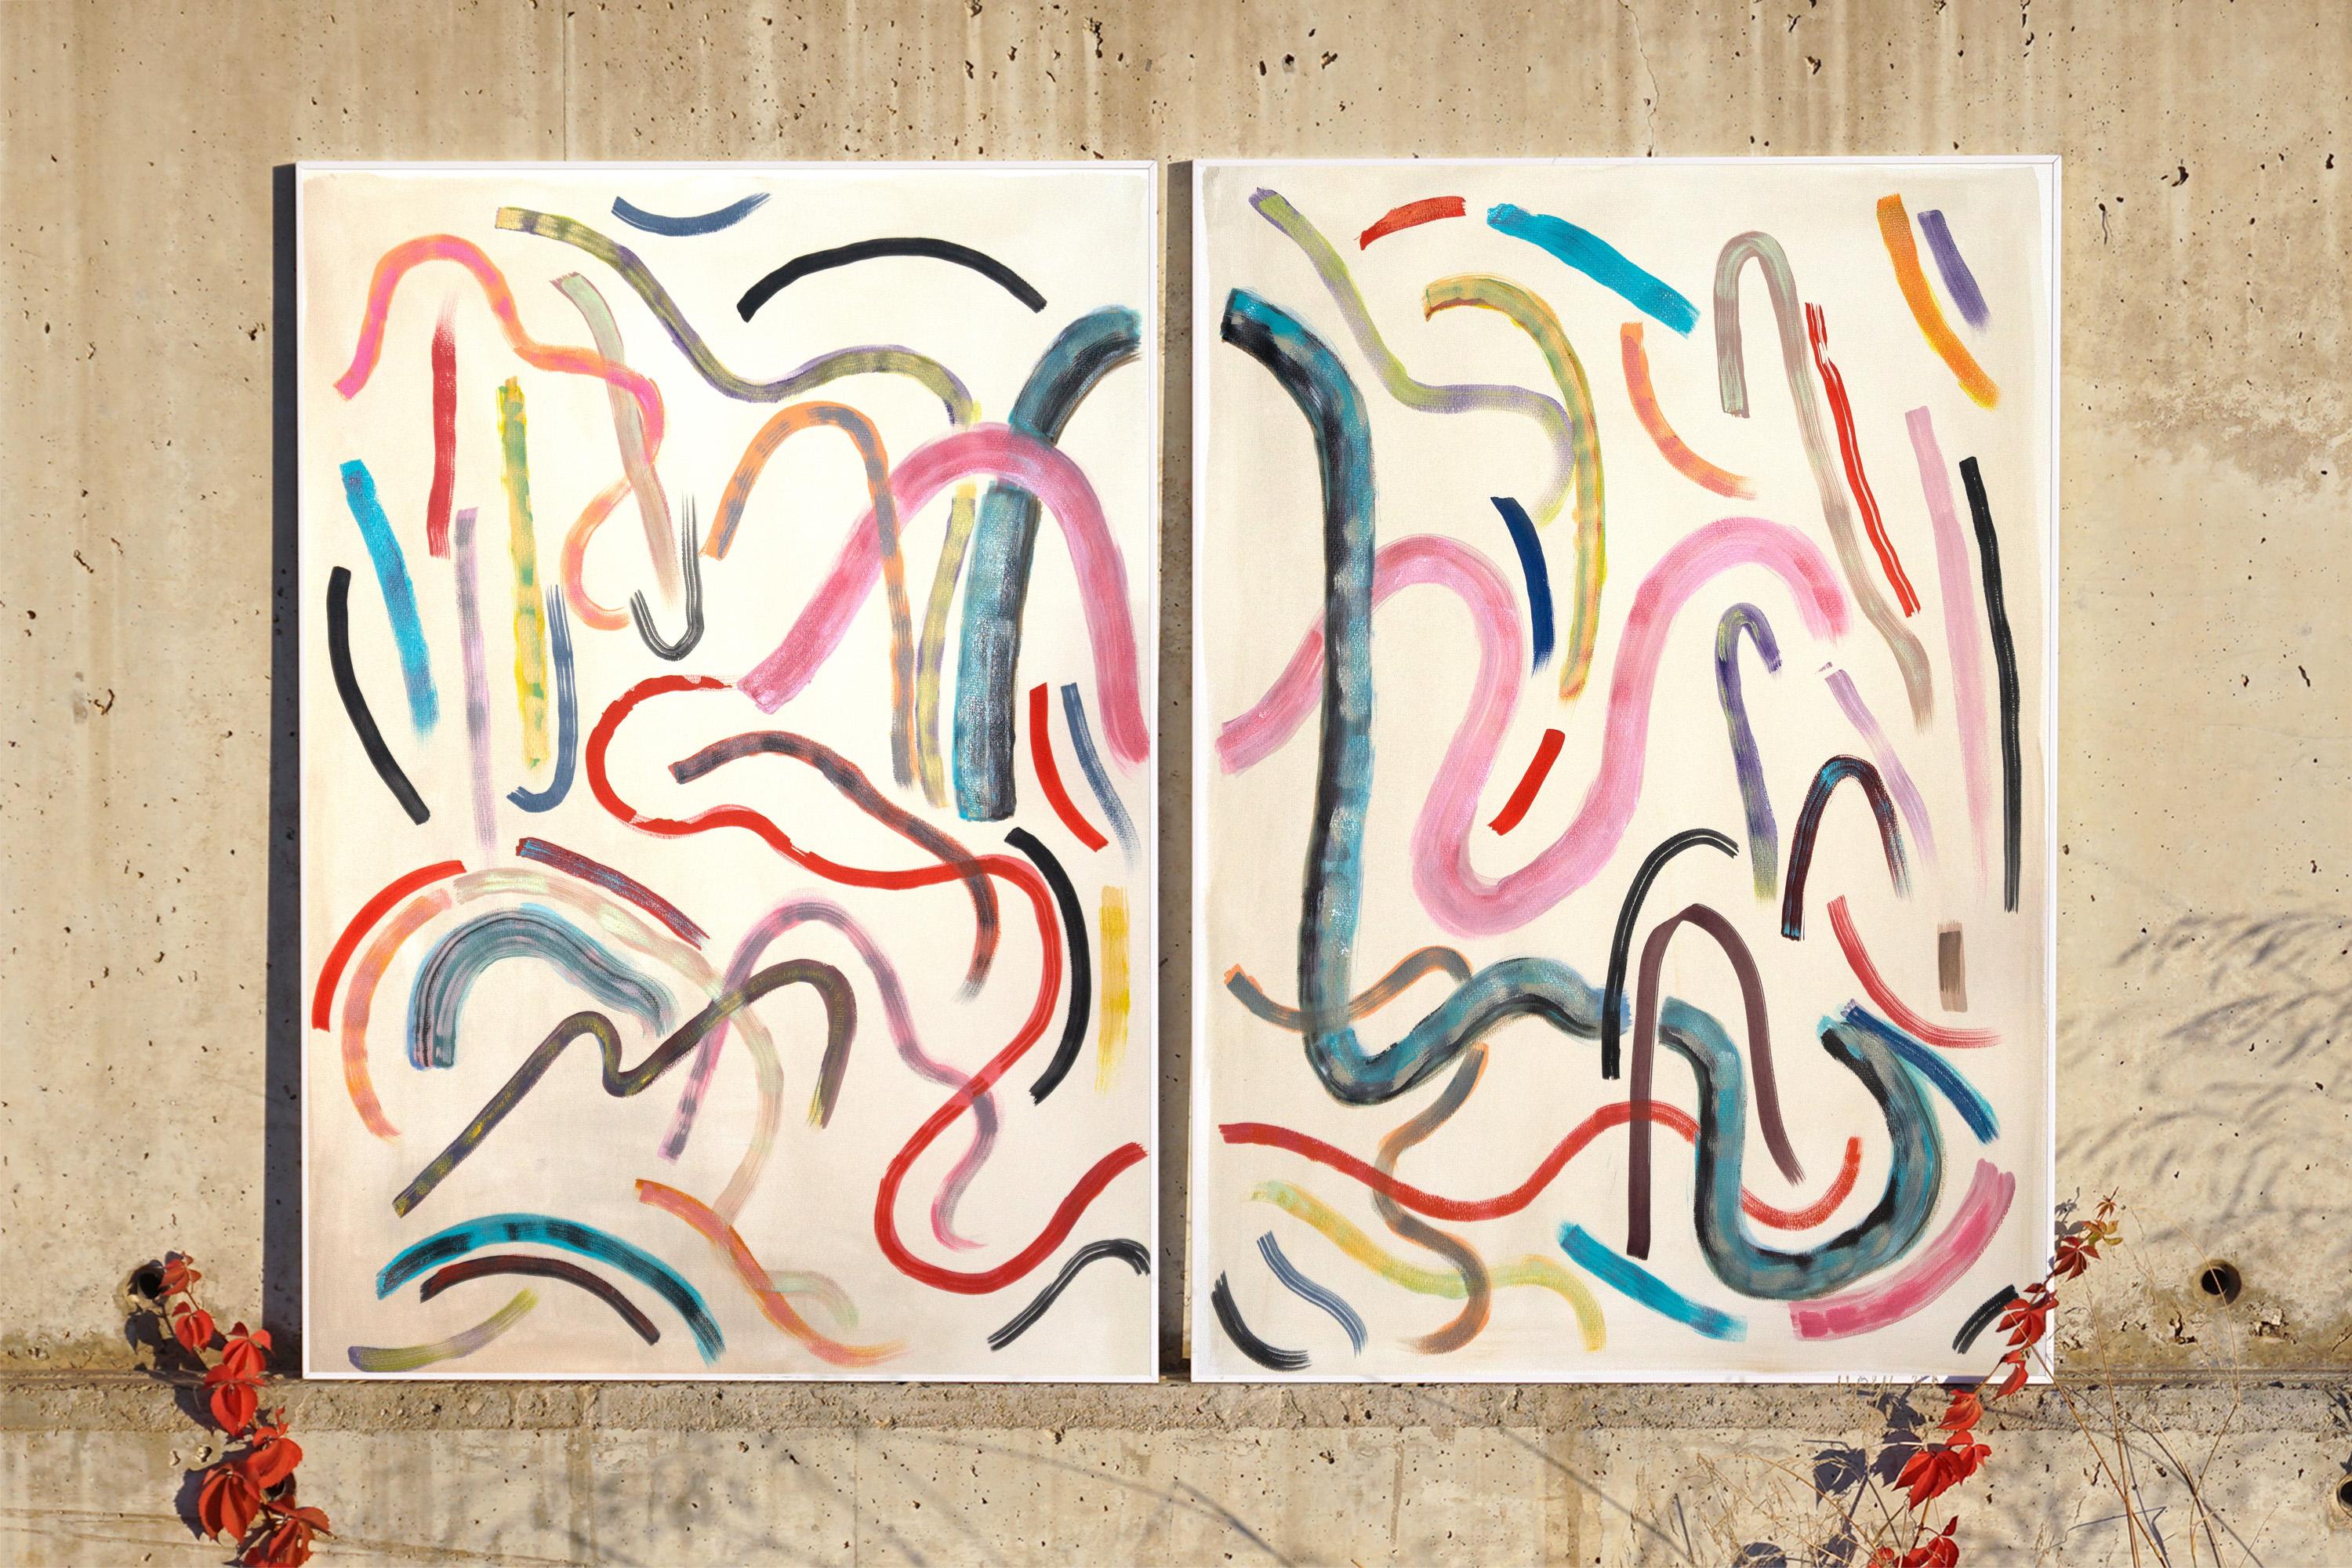 Loose Colorful Gestures, 100x140 cm Diptych, Mixed Media on Watercolor Paper 3